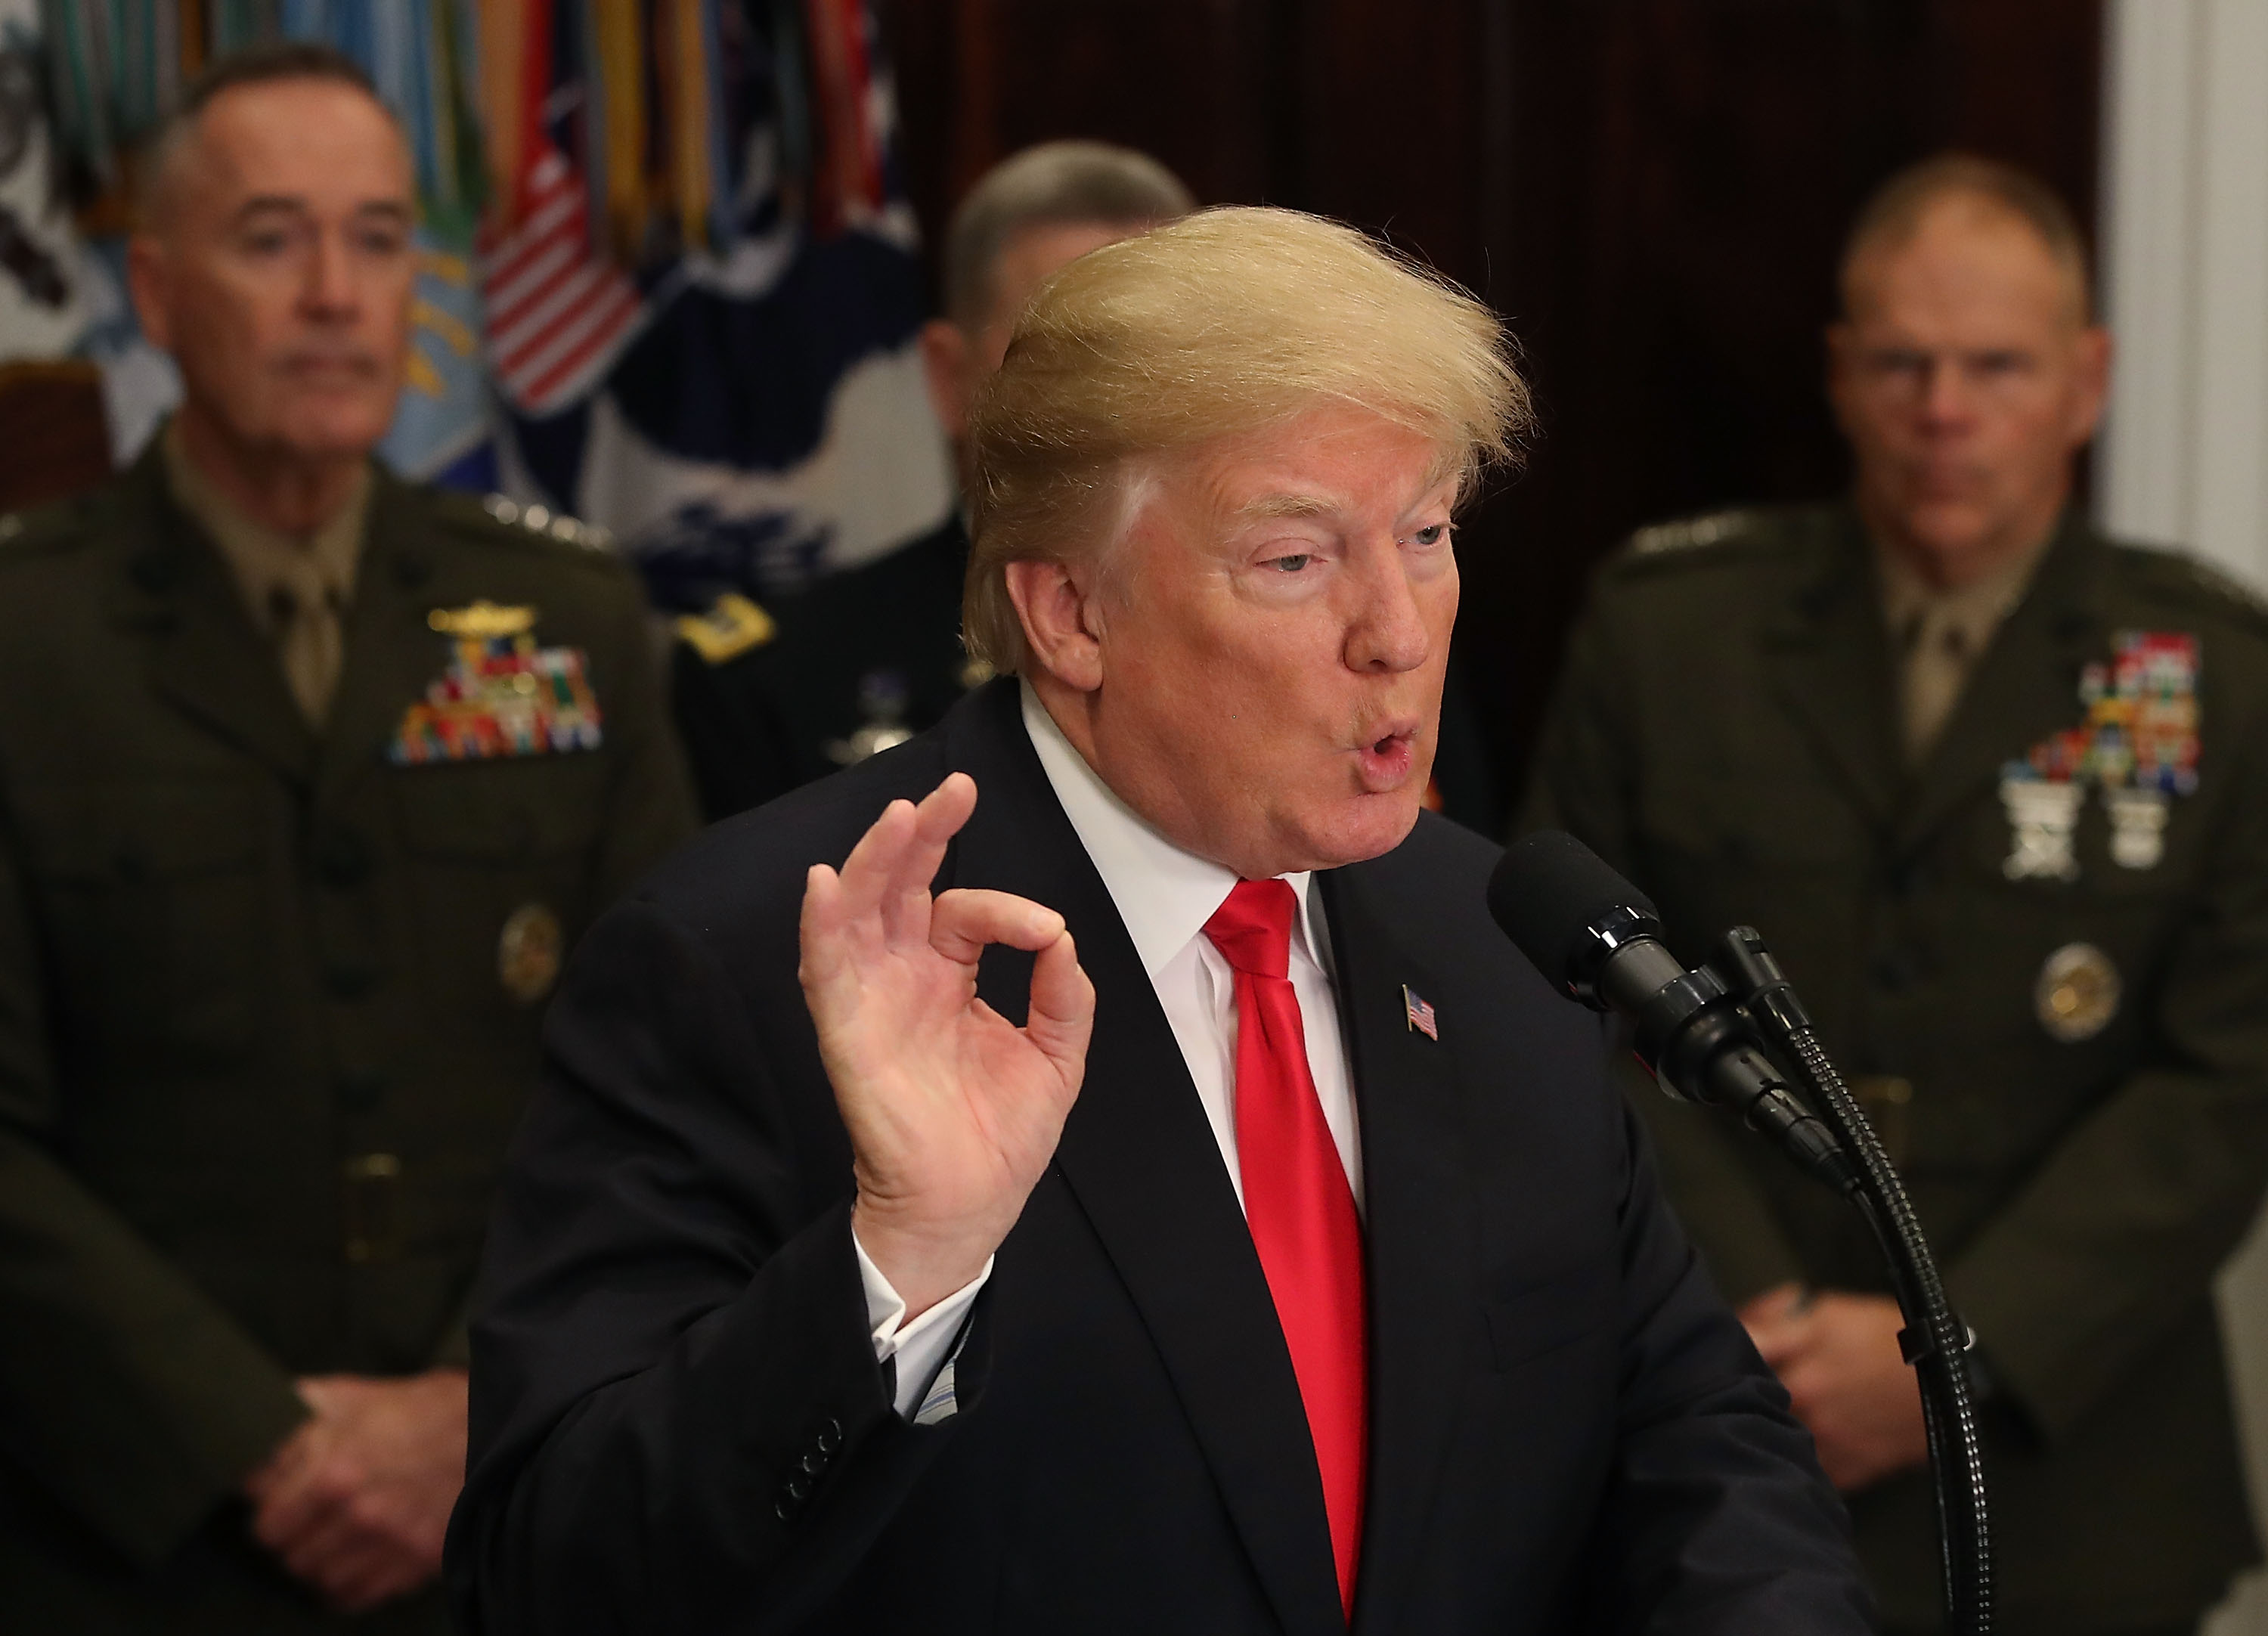 U.S. President Donald Trump speaks before signing the H.R. 2810, National Defense Authorization Act for fiscal year 2018, in the Roosevelt Room at the White House, on December 12, 2017 in Washington, DC. (Mark Wilson&mdash;Getty Images)